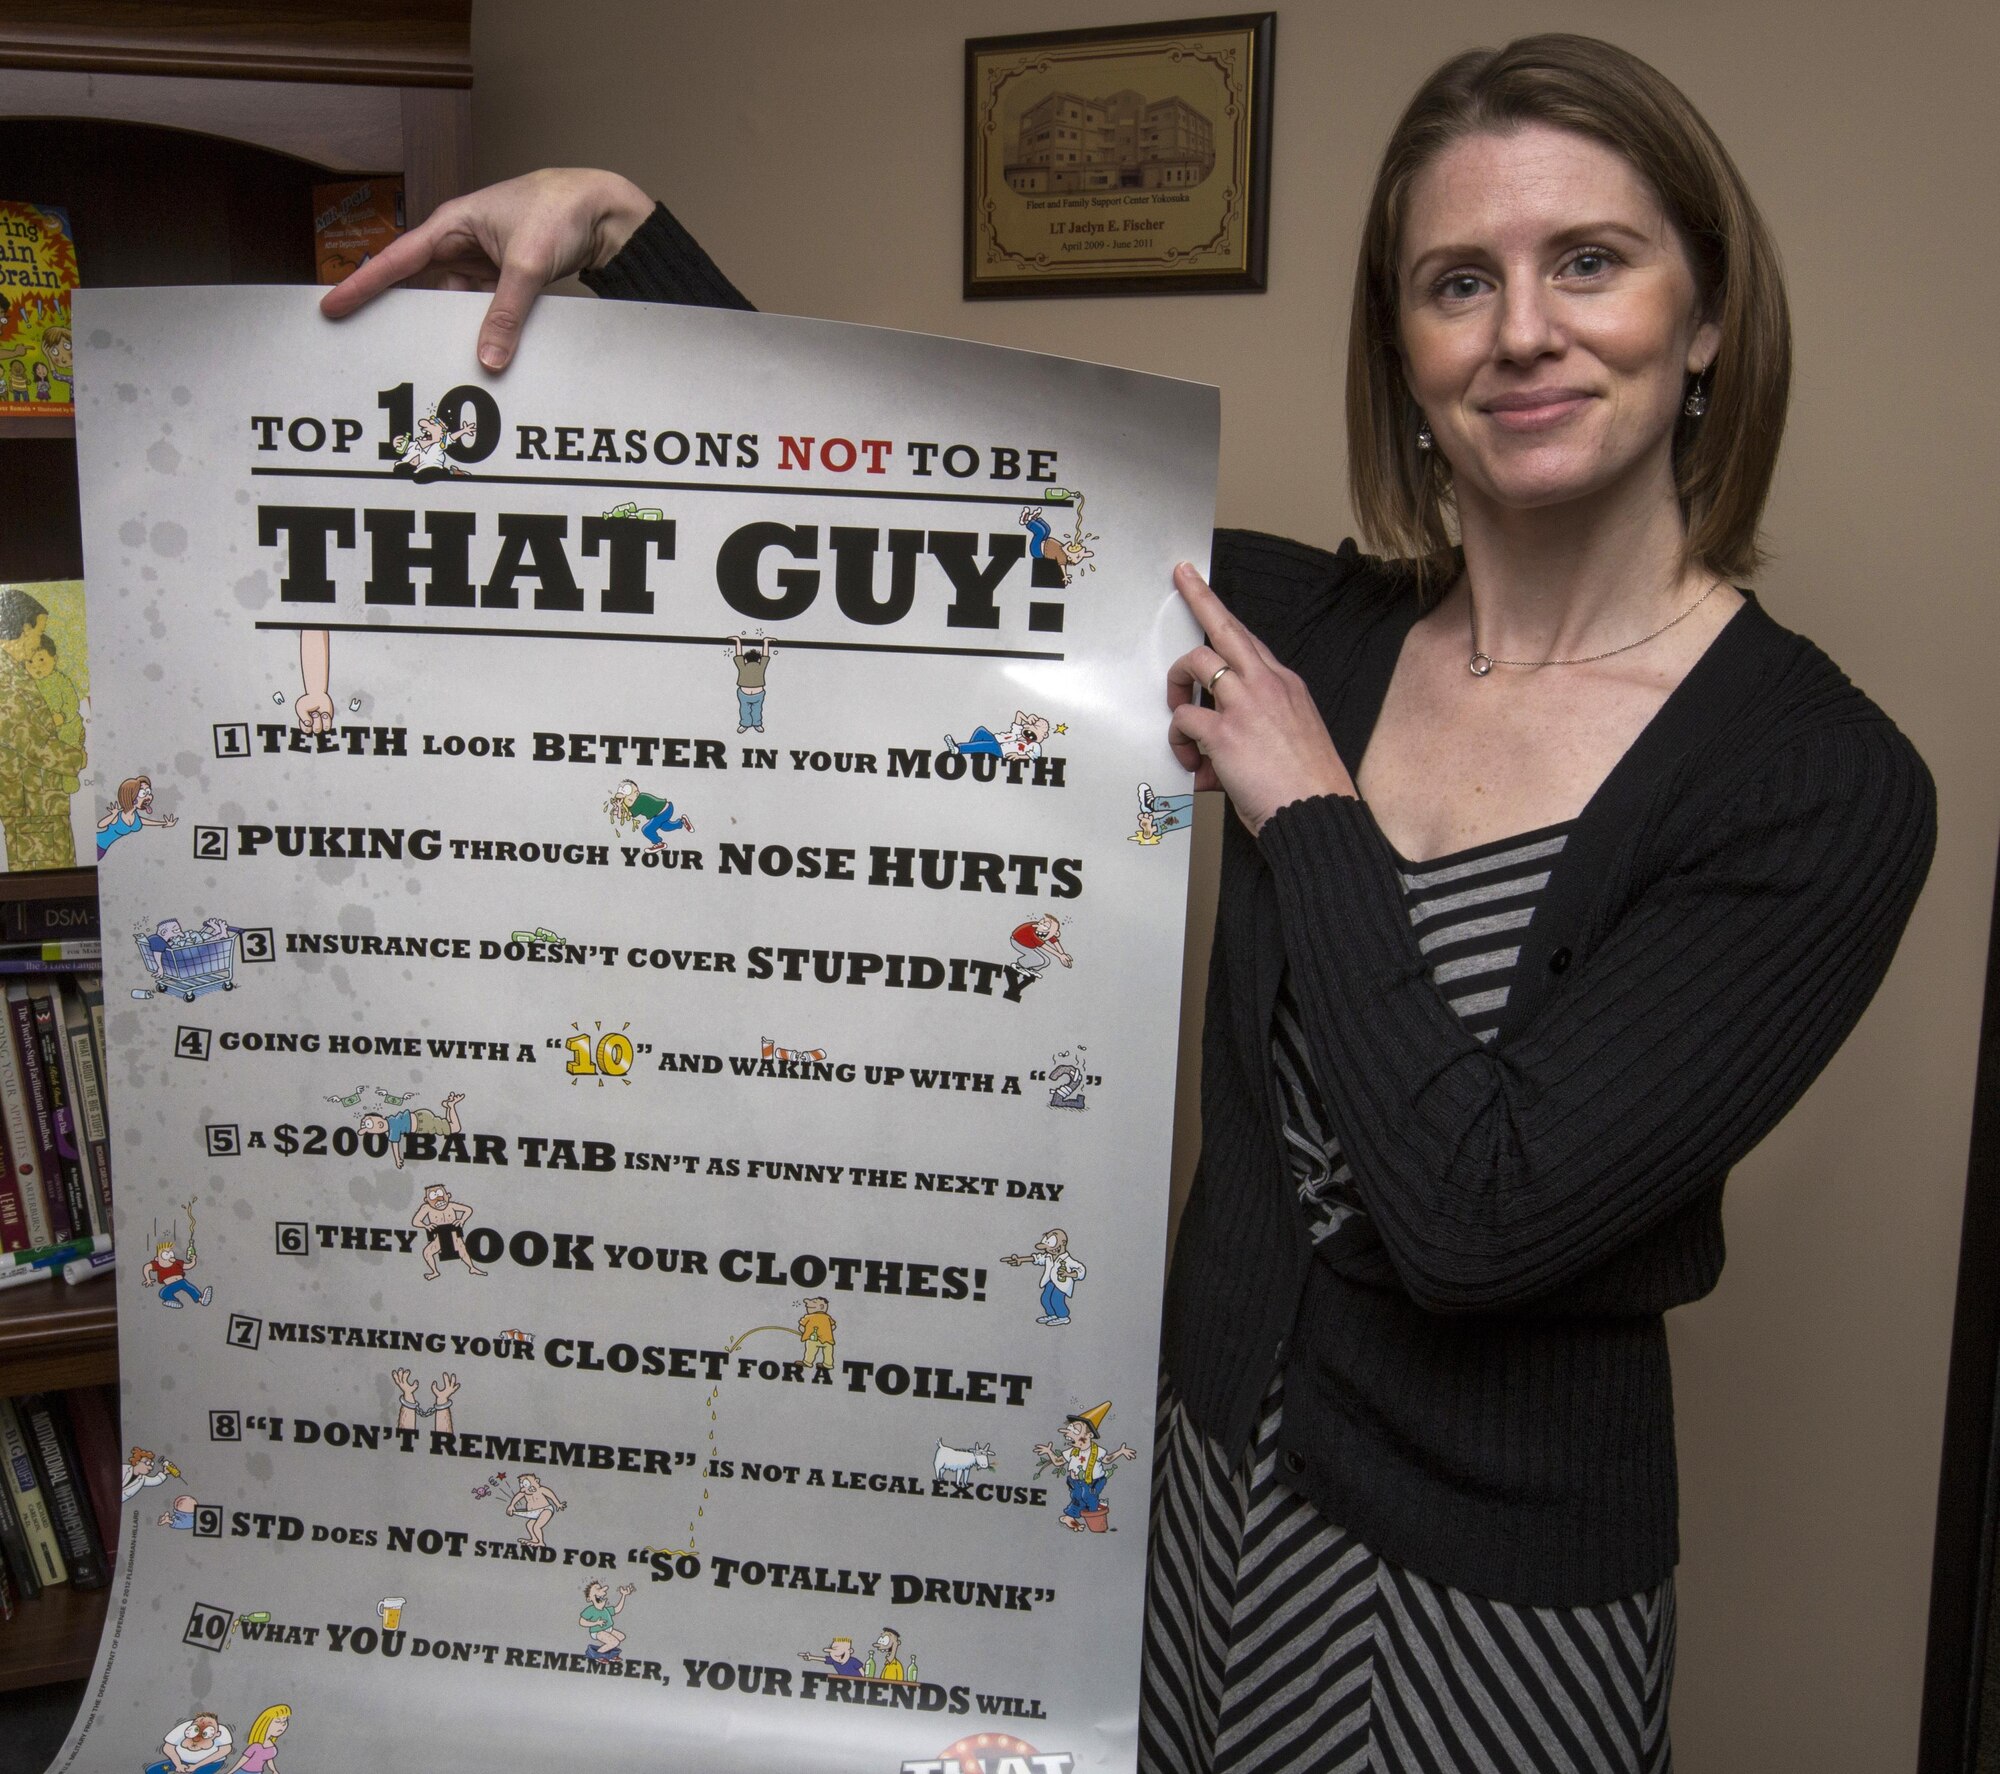 Jaclyn Urmey Director of Psychological Health, 514th Air Mobility Wing, Air Force Reserve; Reserve Command, holds a “That Guy” poster in her office at Joint Base McGuire-Dix-Lakehurst, N.J., May 20, 2017. “That Guy” is a Department of Defense campaign that was started in 2005 to reduce excessive binge drinking among 18- to 24-year-olds serving in the armed forces. (U.S. Air Force photo by Master Sgt. Mark C. Olsen/Released)